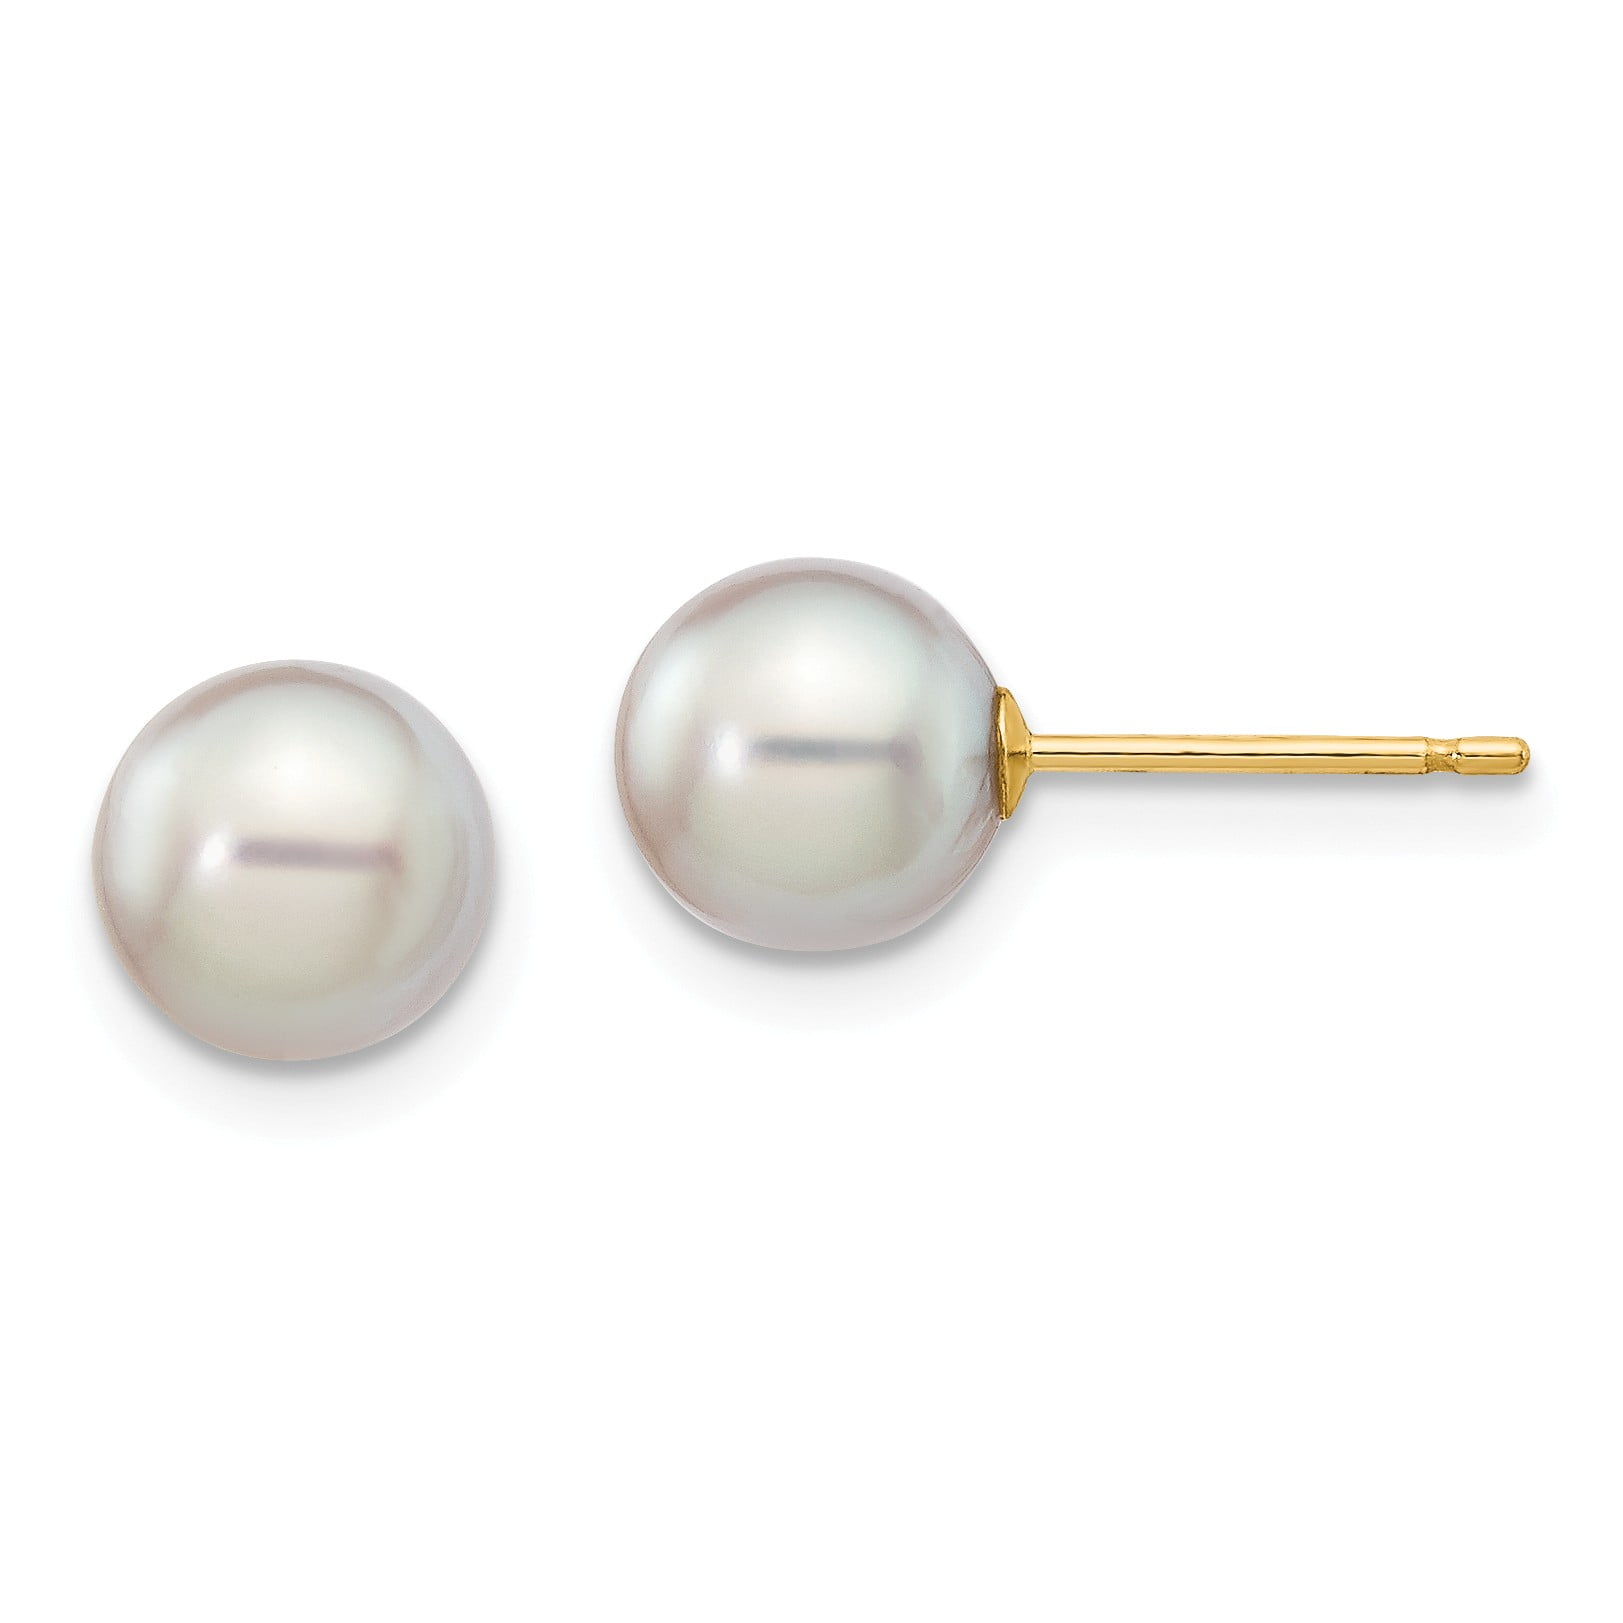 Details about   6mm Fully ROUND AAA Cultured Pearl Stud Earrings-Solid 14k White Gold PUSH BACKS 